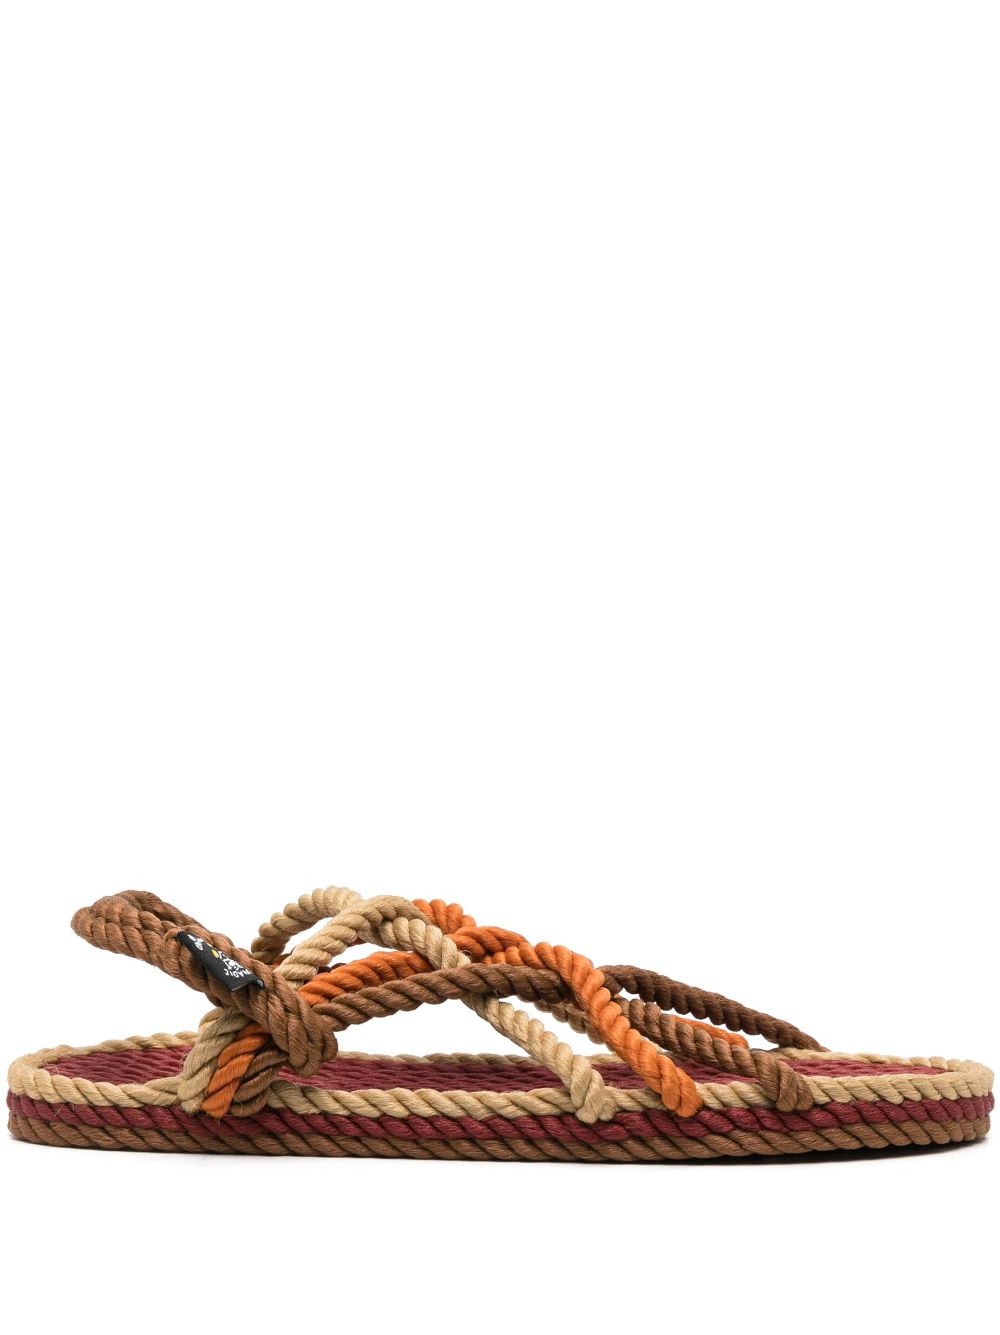 Nomadic State of Mind Jc rope open-toe sandals - Red von Nomadic State of Mind